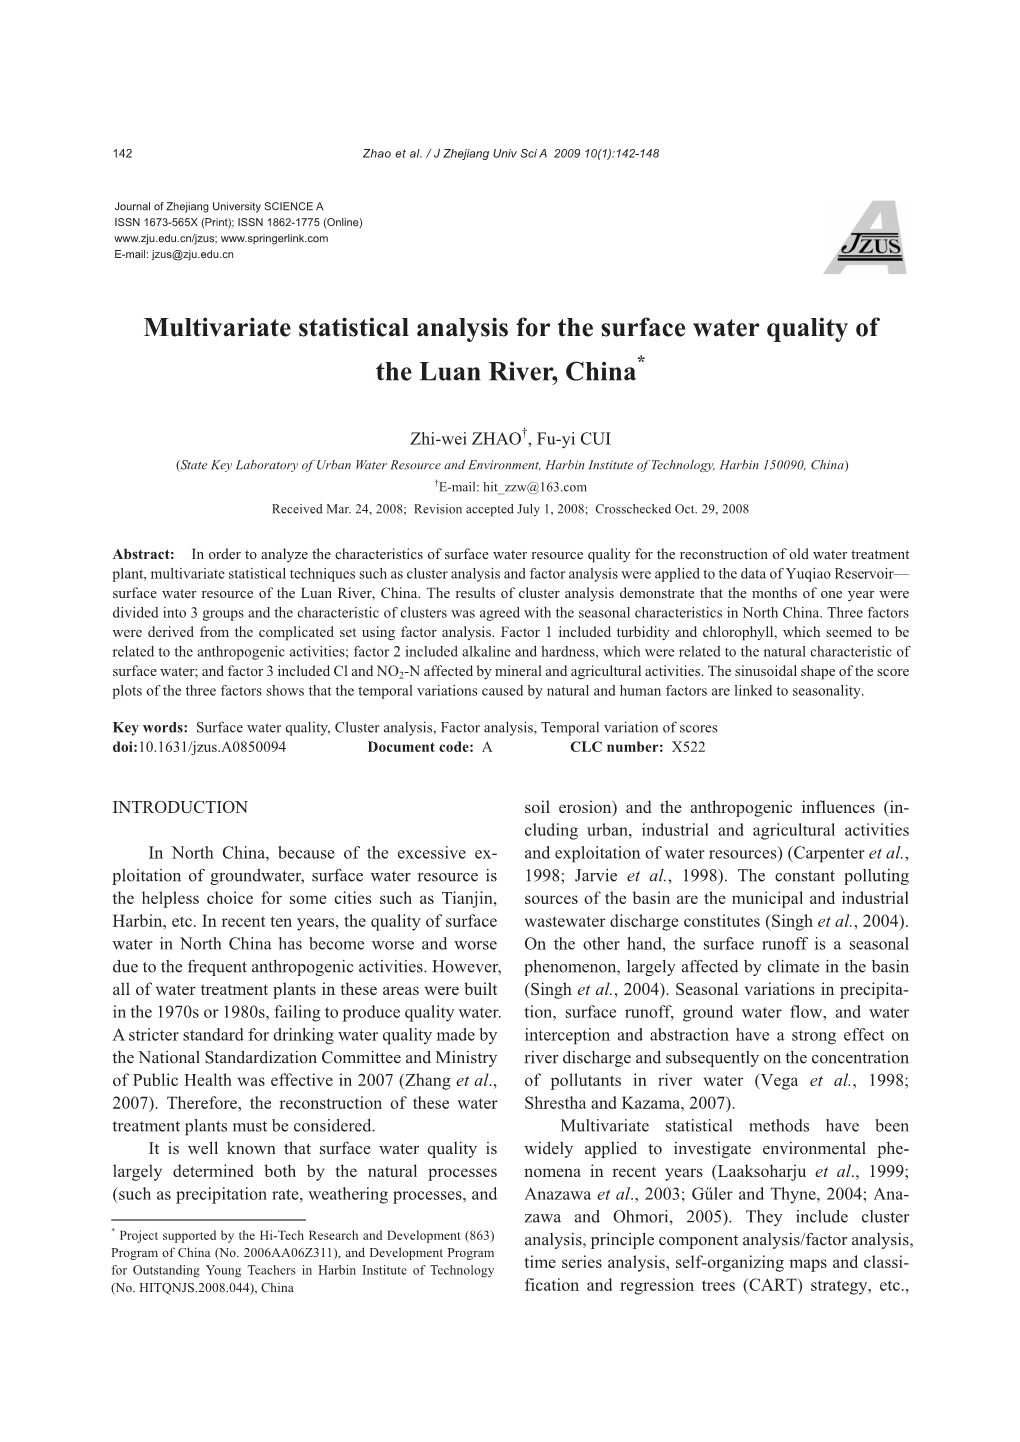 Multivariate Statistical Analysis for the Surface Water Quality of the Luan River, China*